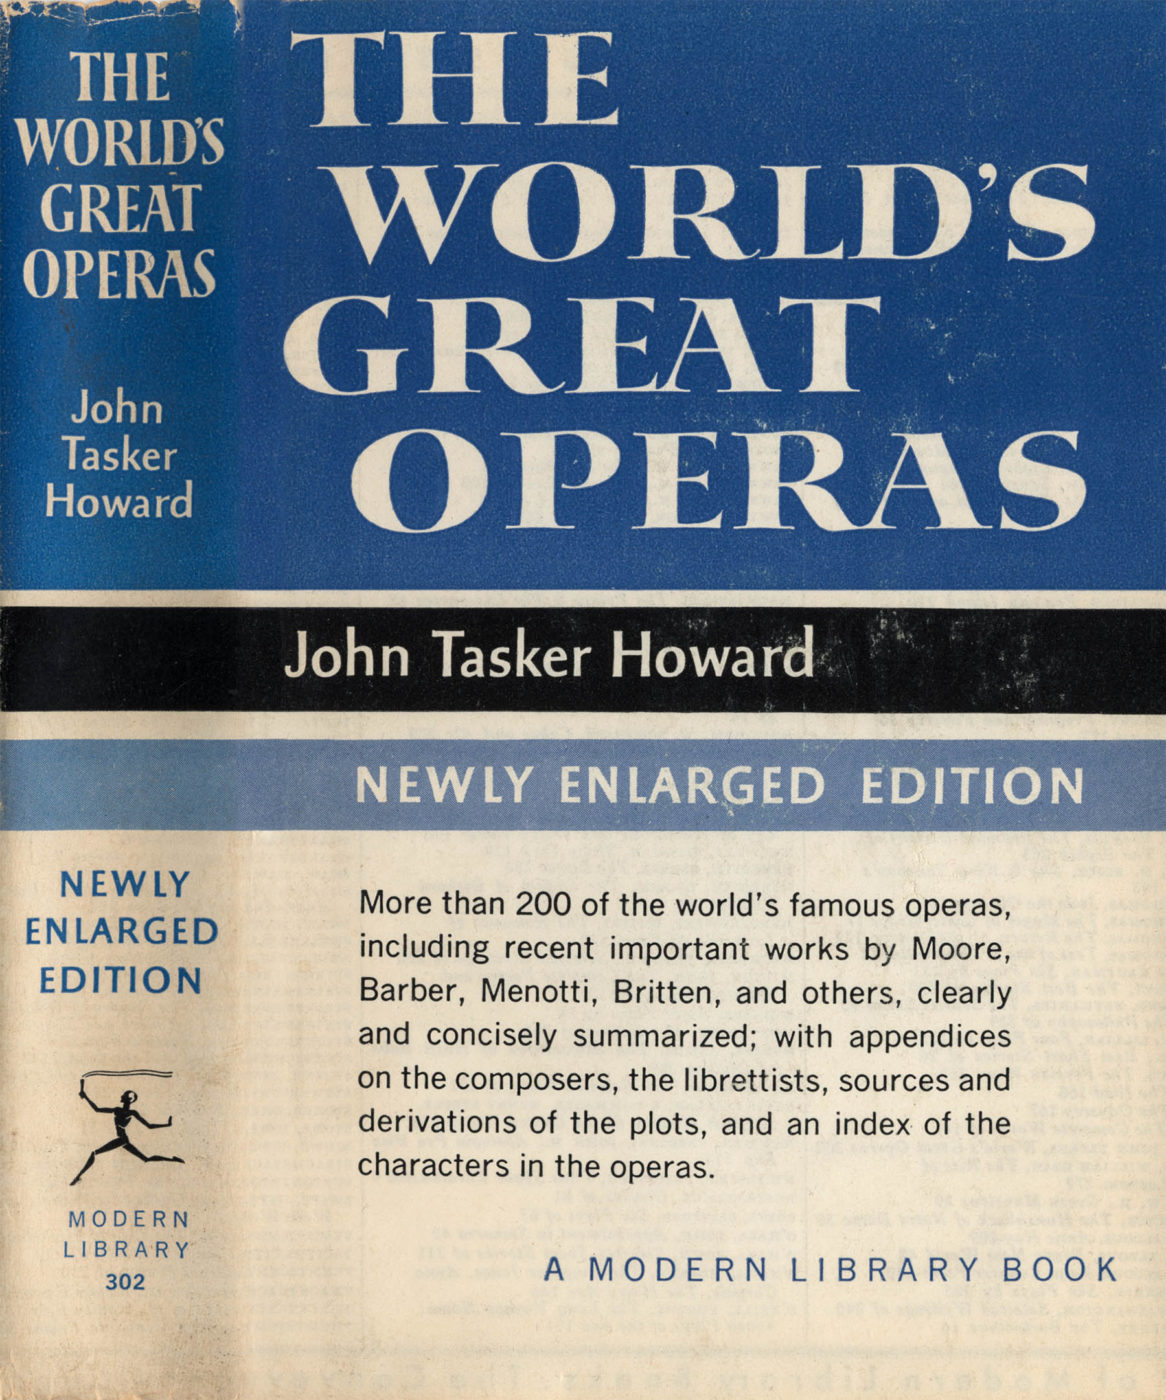 Book jacket of The World’s Great Operas